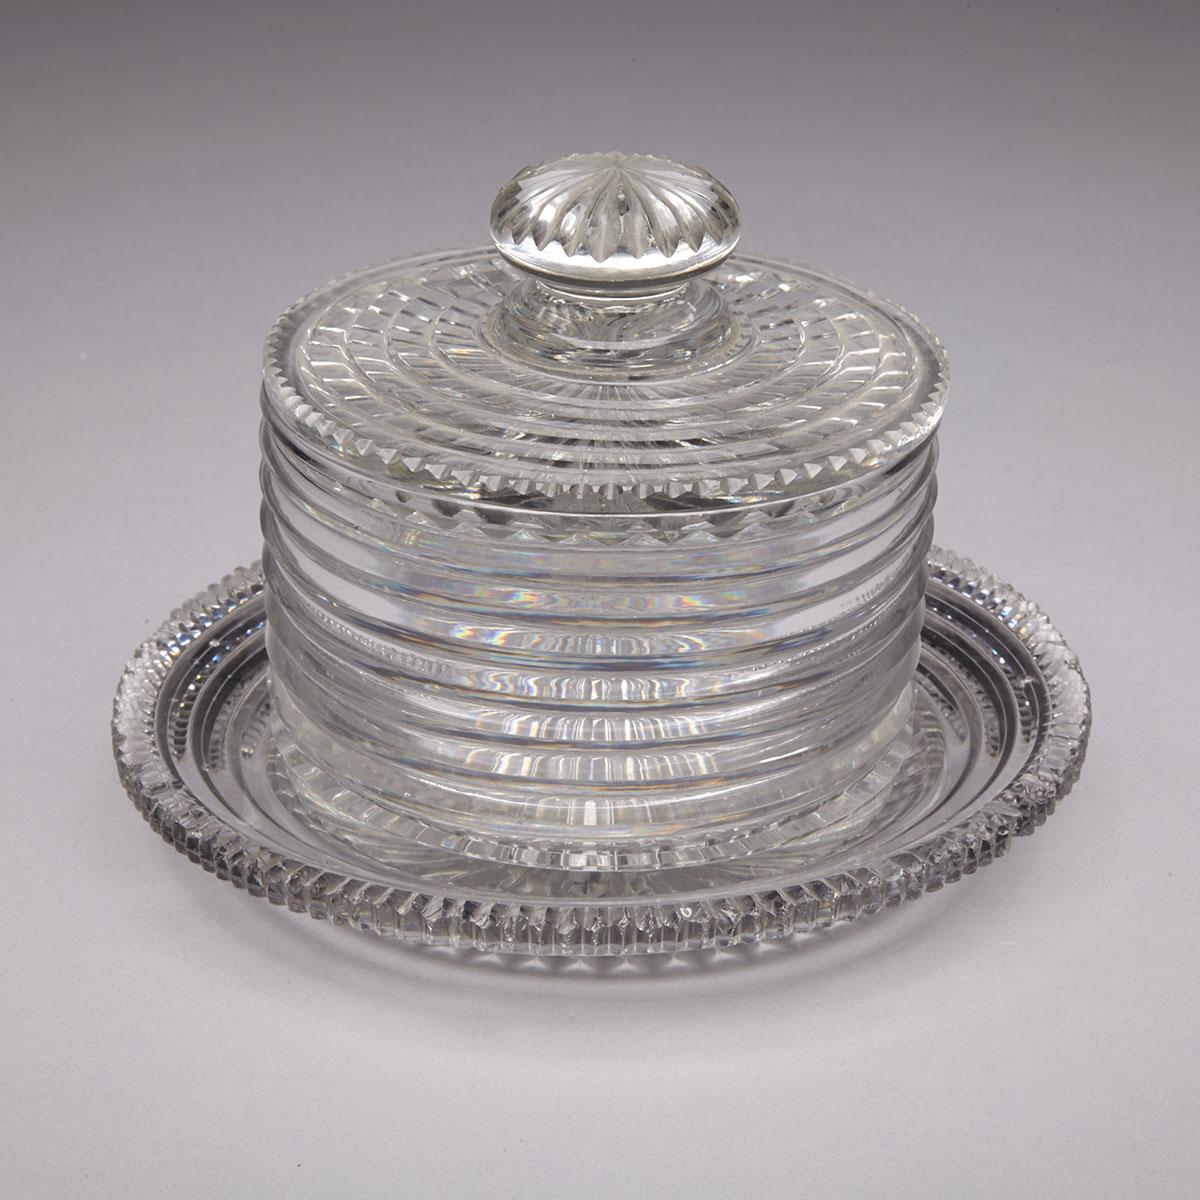 Anglo-Irish Cut Glass Butter Dish with Cover and Stand, early 19th century